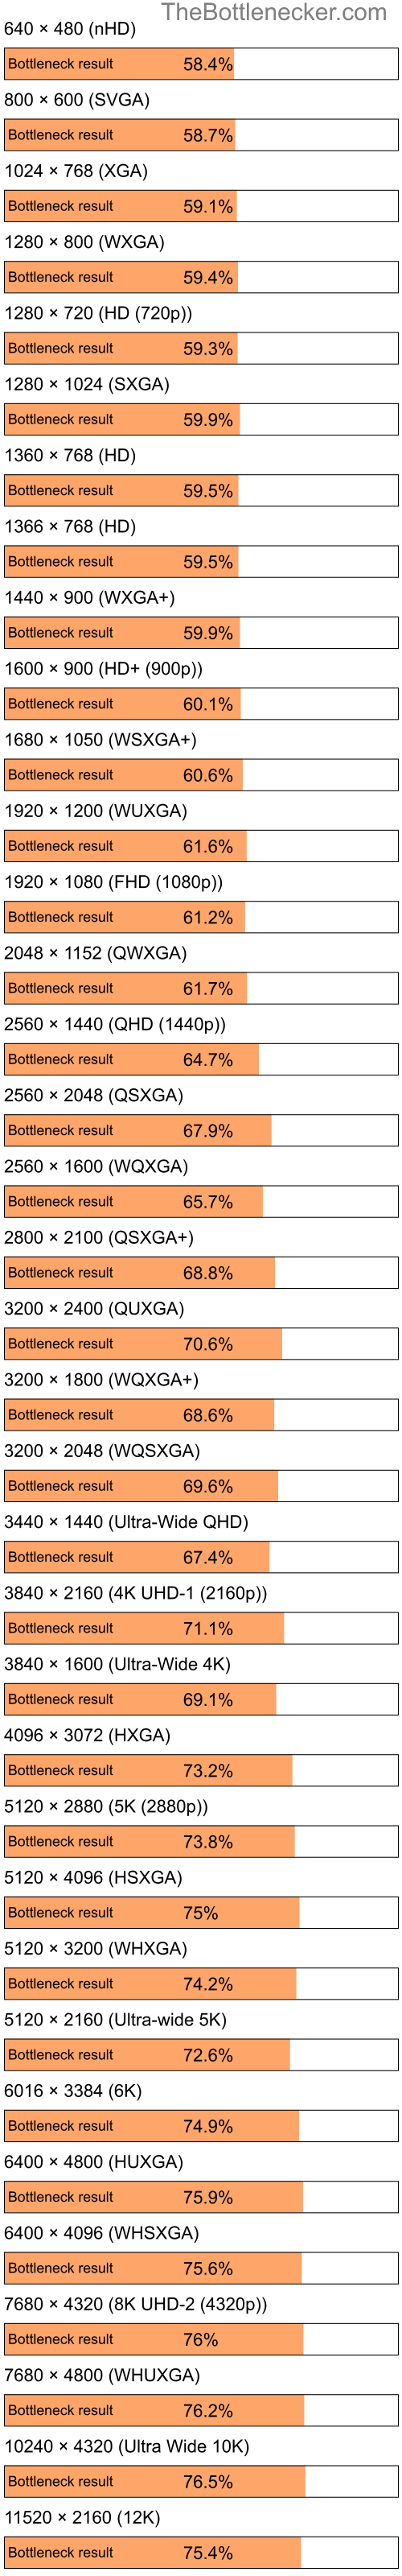 Bottleneck results by resolution for Intel Pentium 4 and AMD Mobility Radeon HD 3450 in General Tasks